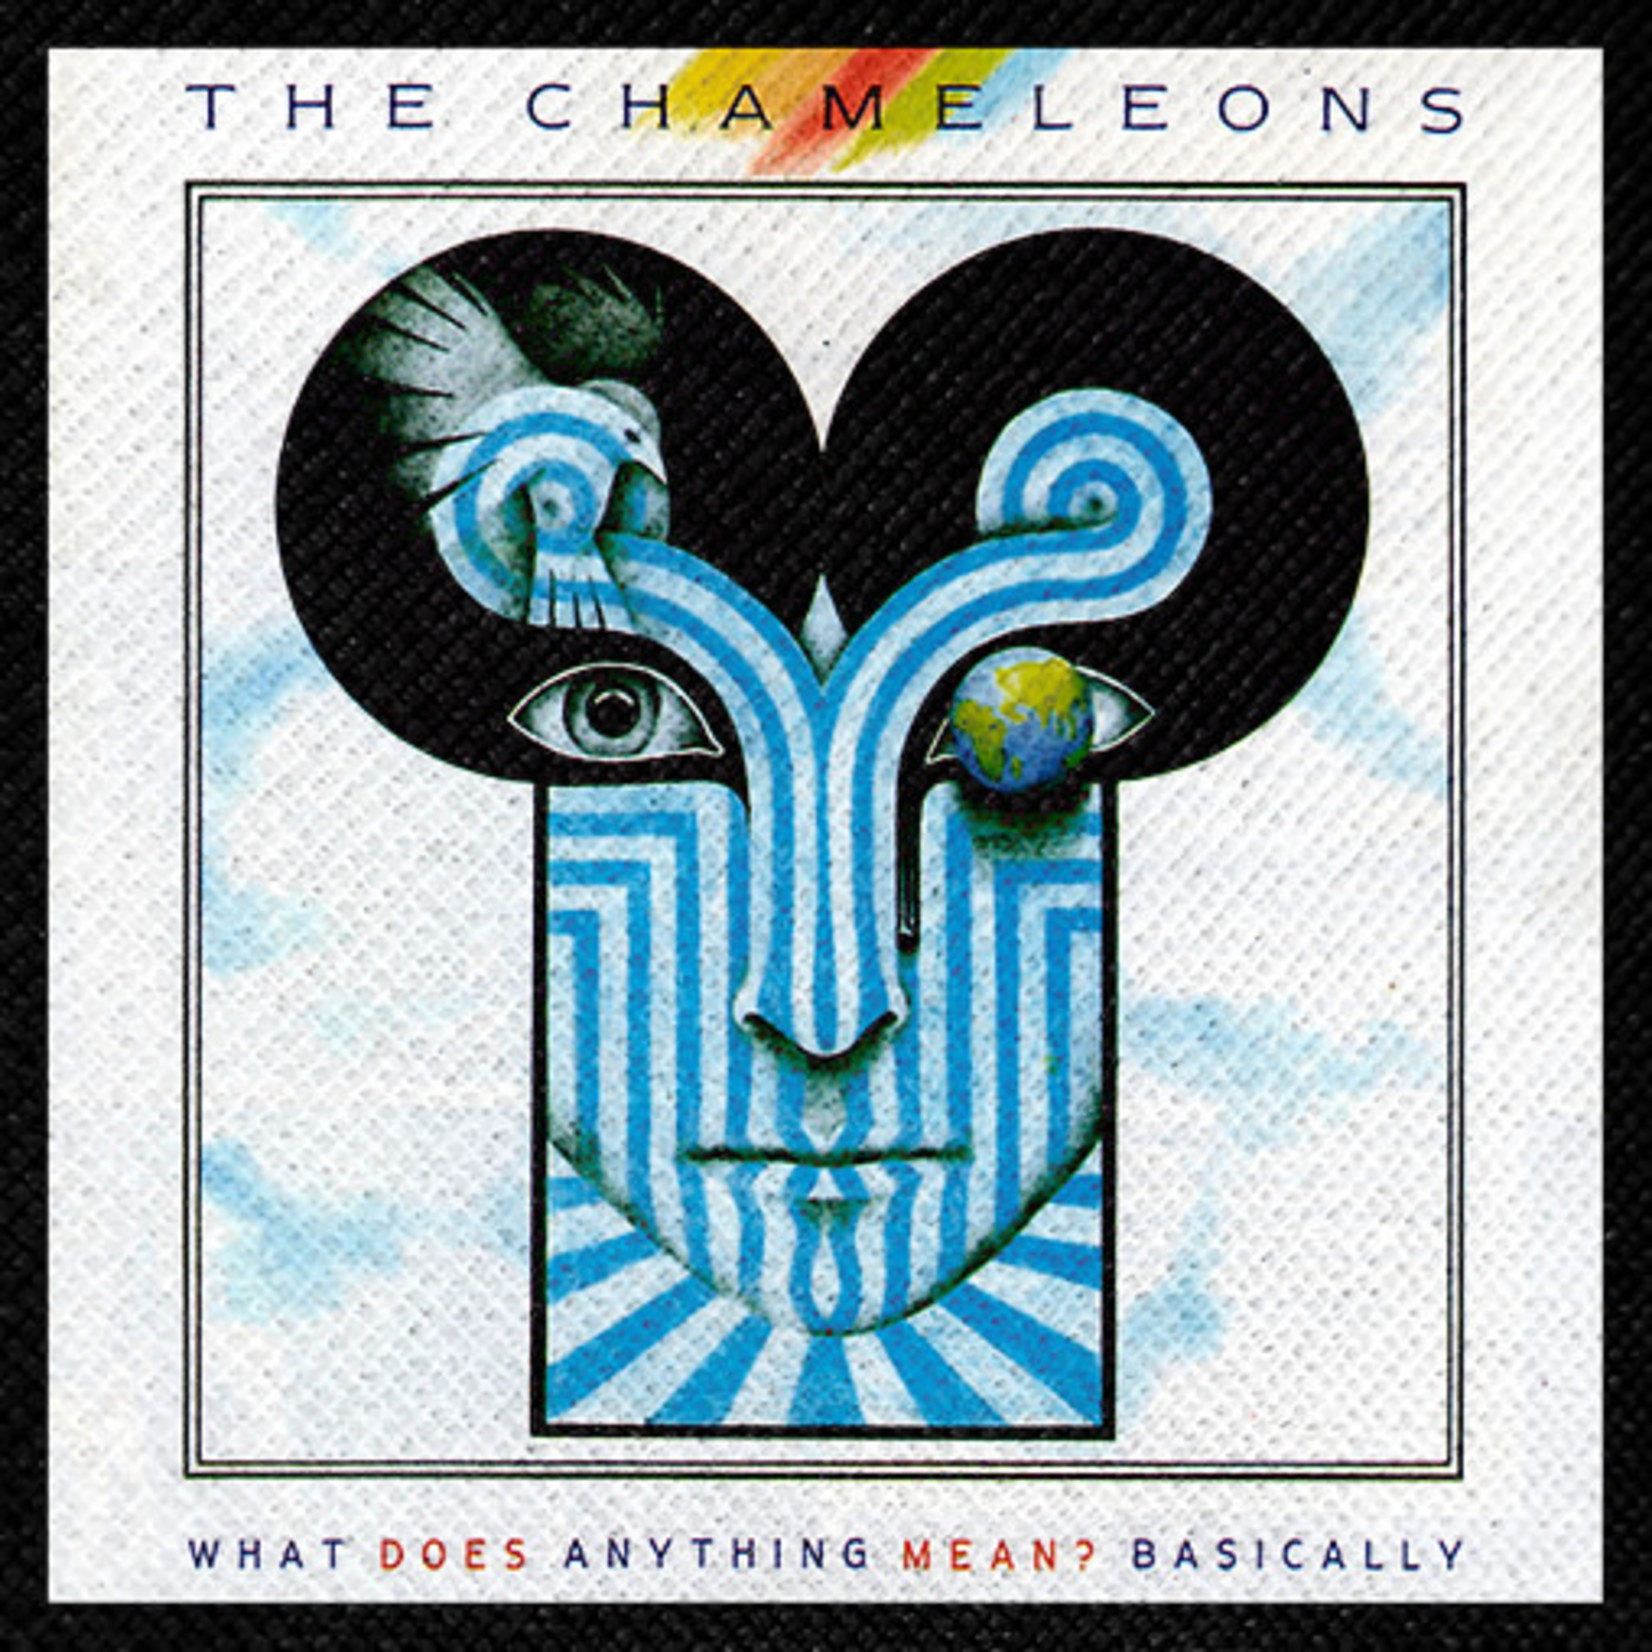 [New] Chameleons - What Does Anything Mean? Basically